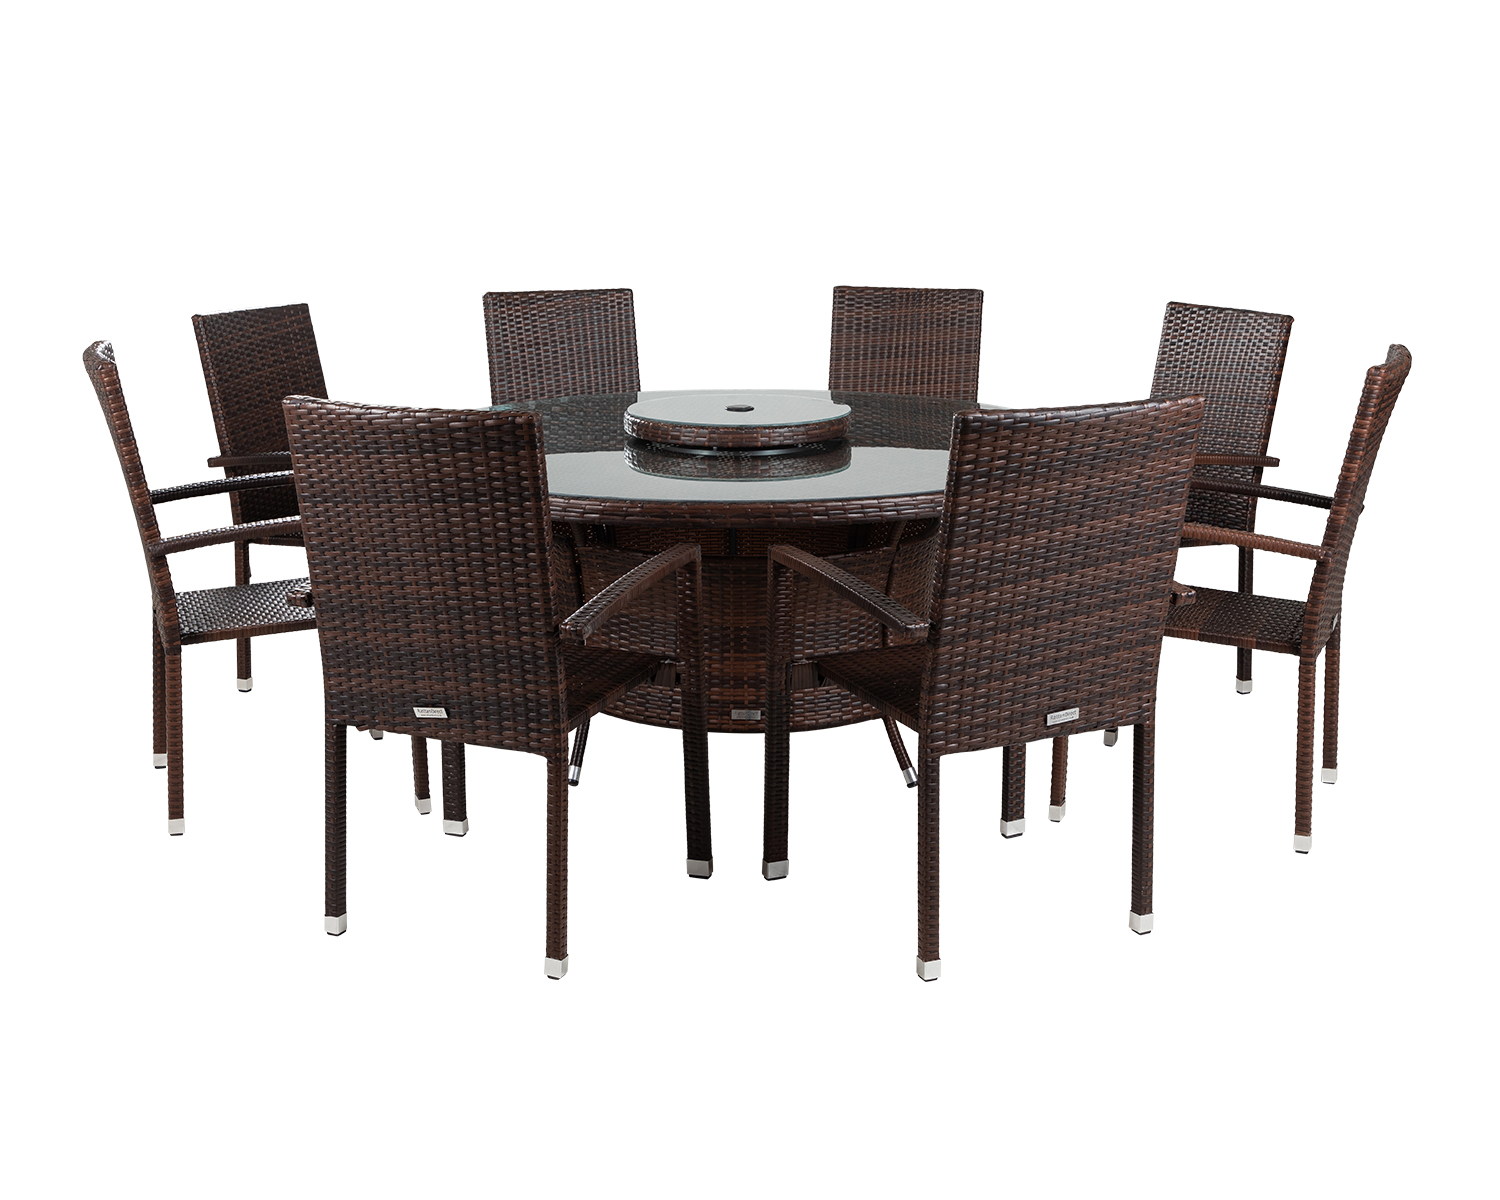 8 Seat Rattan Garden Dining Set With Large Round Dining Table In Brown Rio Rattan Direct